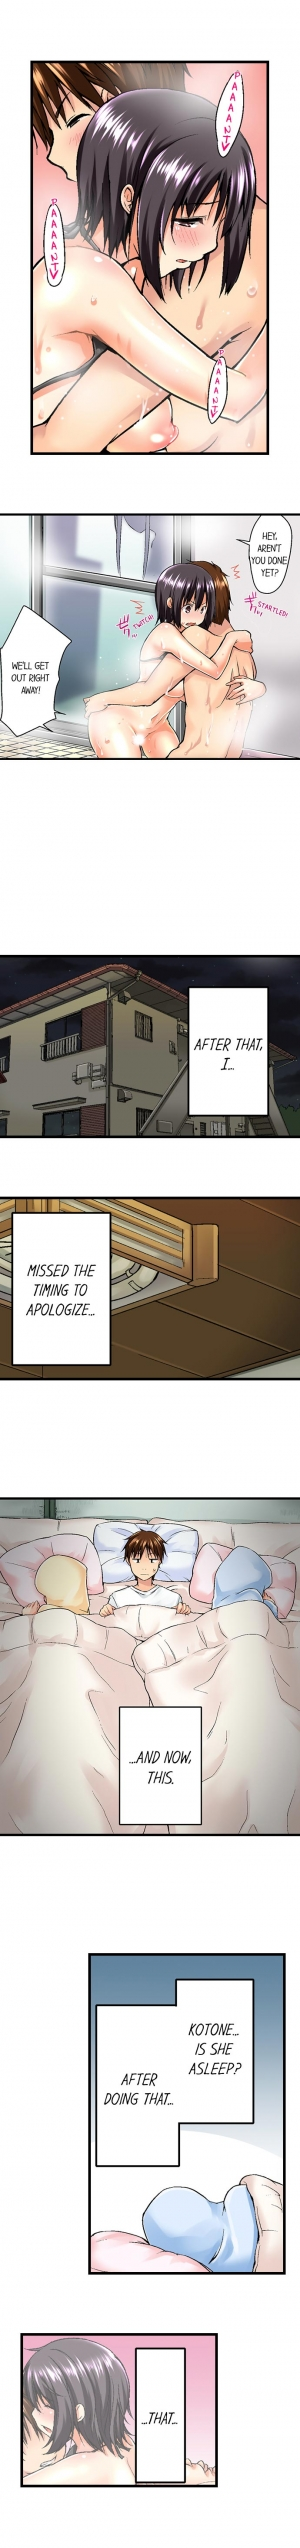 [Kaiduka] My Brother's Slipped Inside Me in The Bathtub (Ongoing) - Page 30